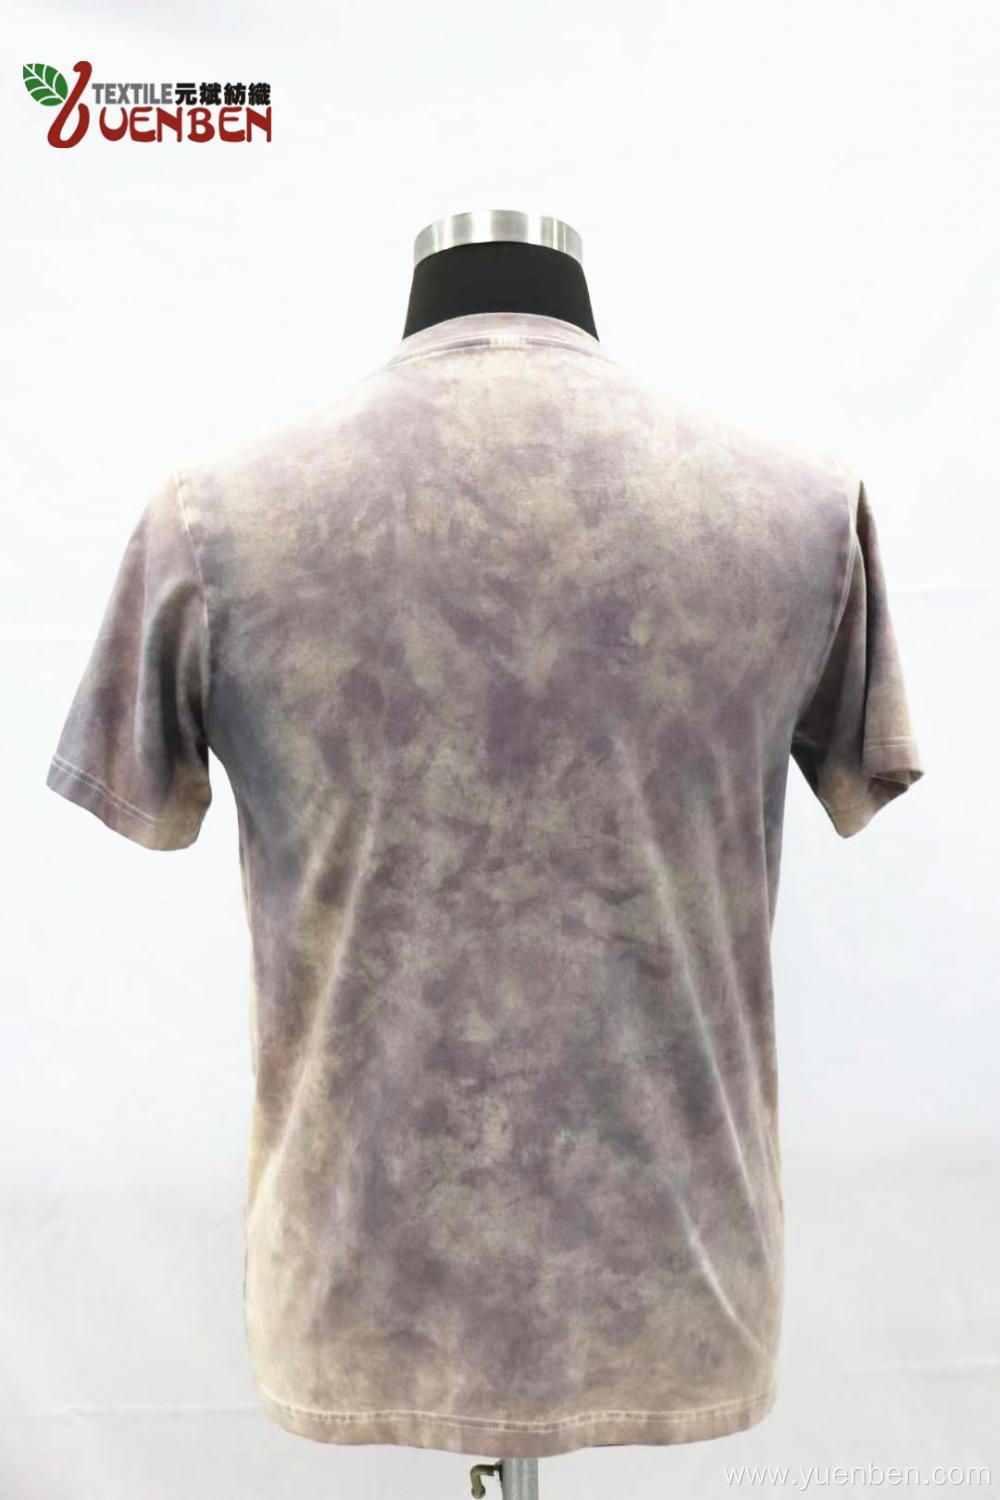 Jersey Dirty Wash Round Neck With Printing Shirt